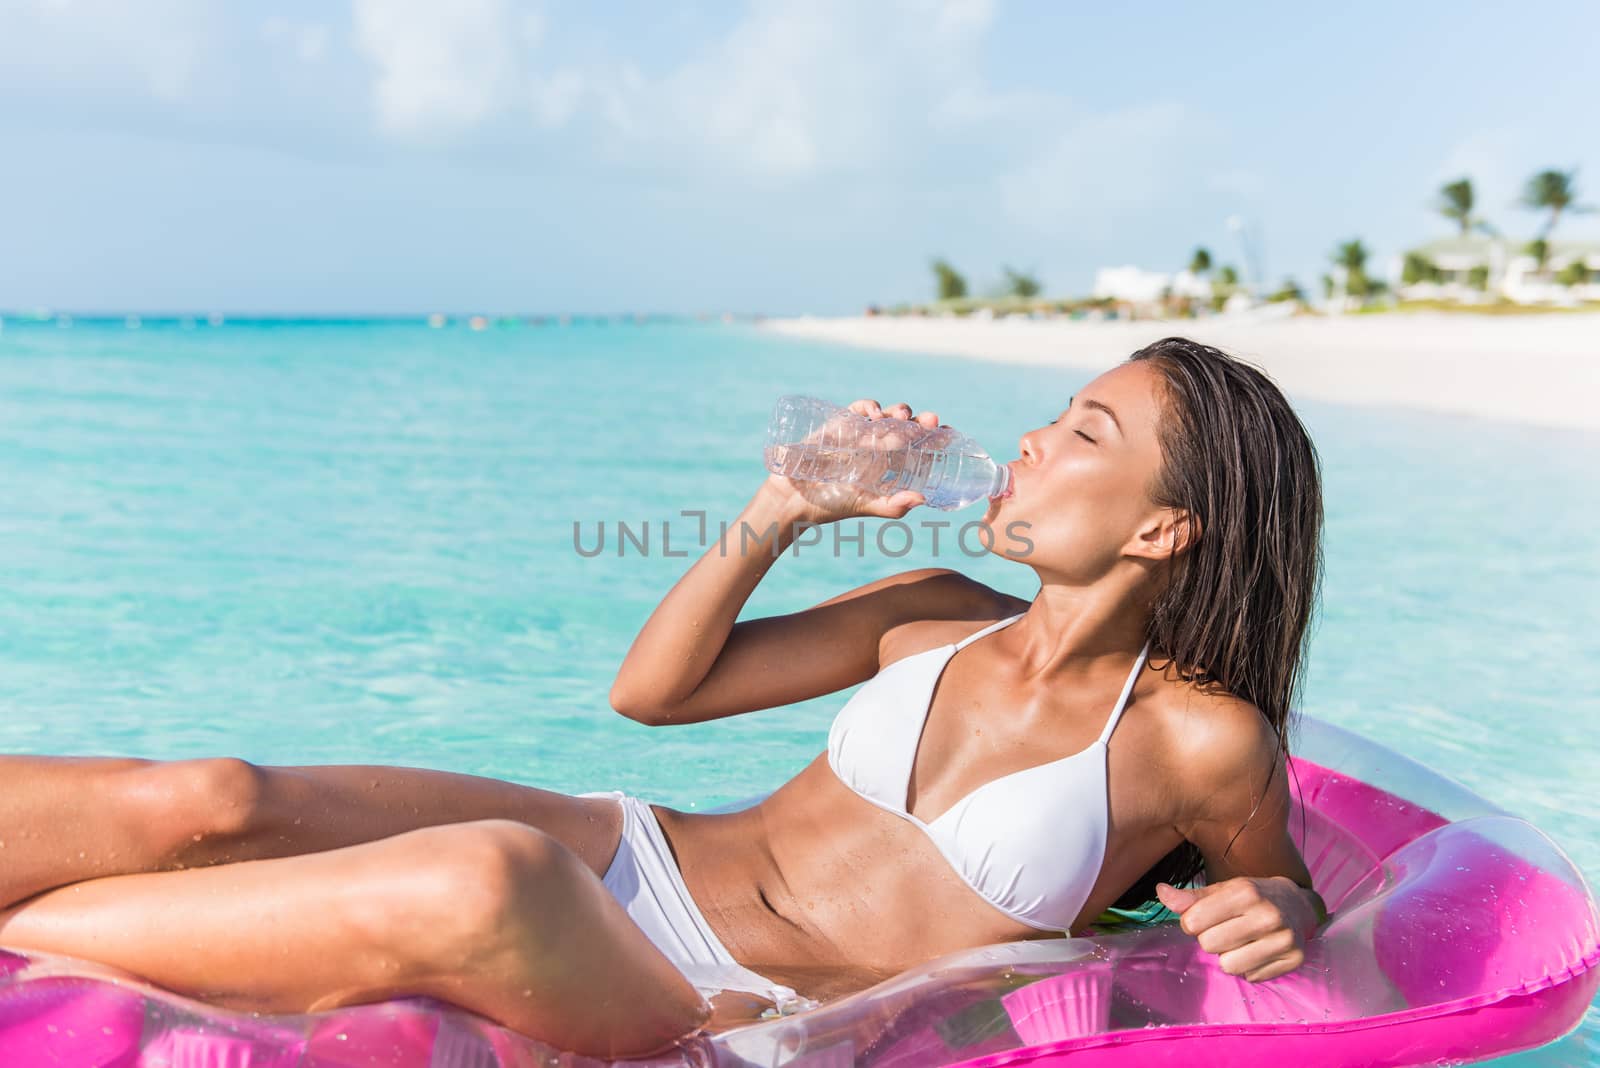 Beach vacation woman on Caribbean holiday drinking fresh and clean water from plastic bottle for healthy hydration while relaxing swimming on ocean float air mattress in tropical resort.